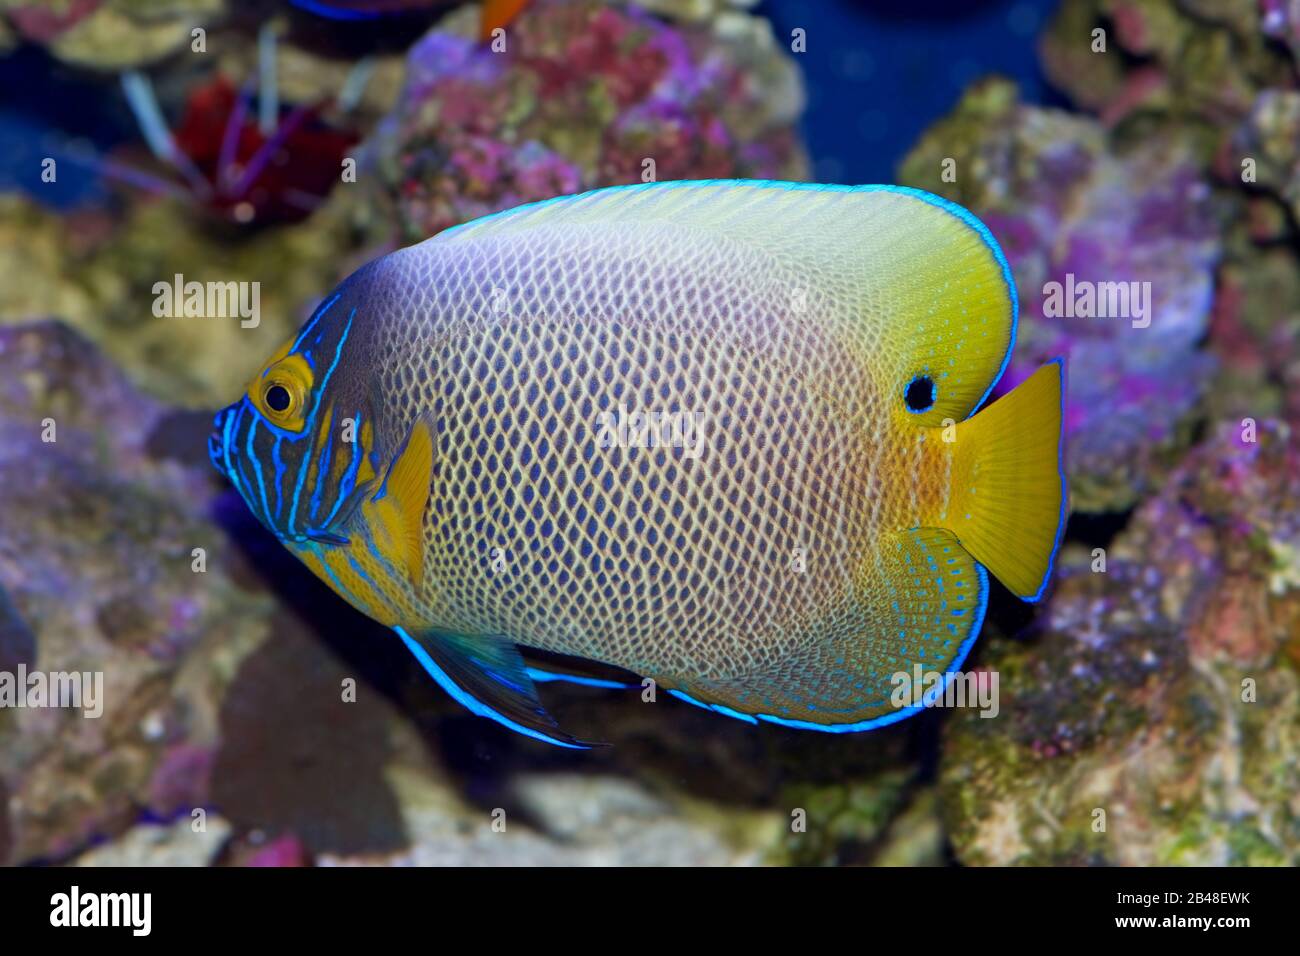 Blue faced angelfish, Pomacanthus xanthometopon, in transition between juvenile and adult colors Stock Photo